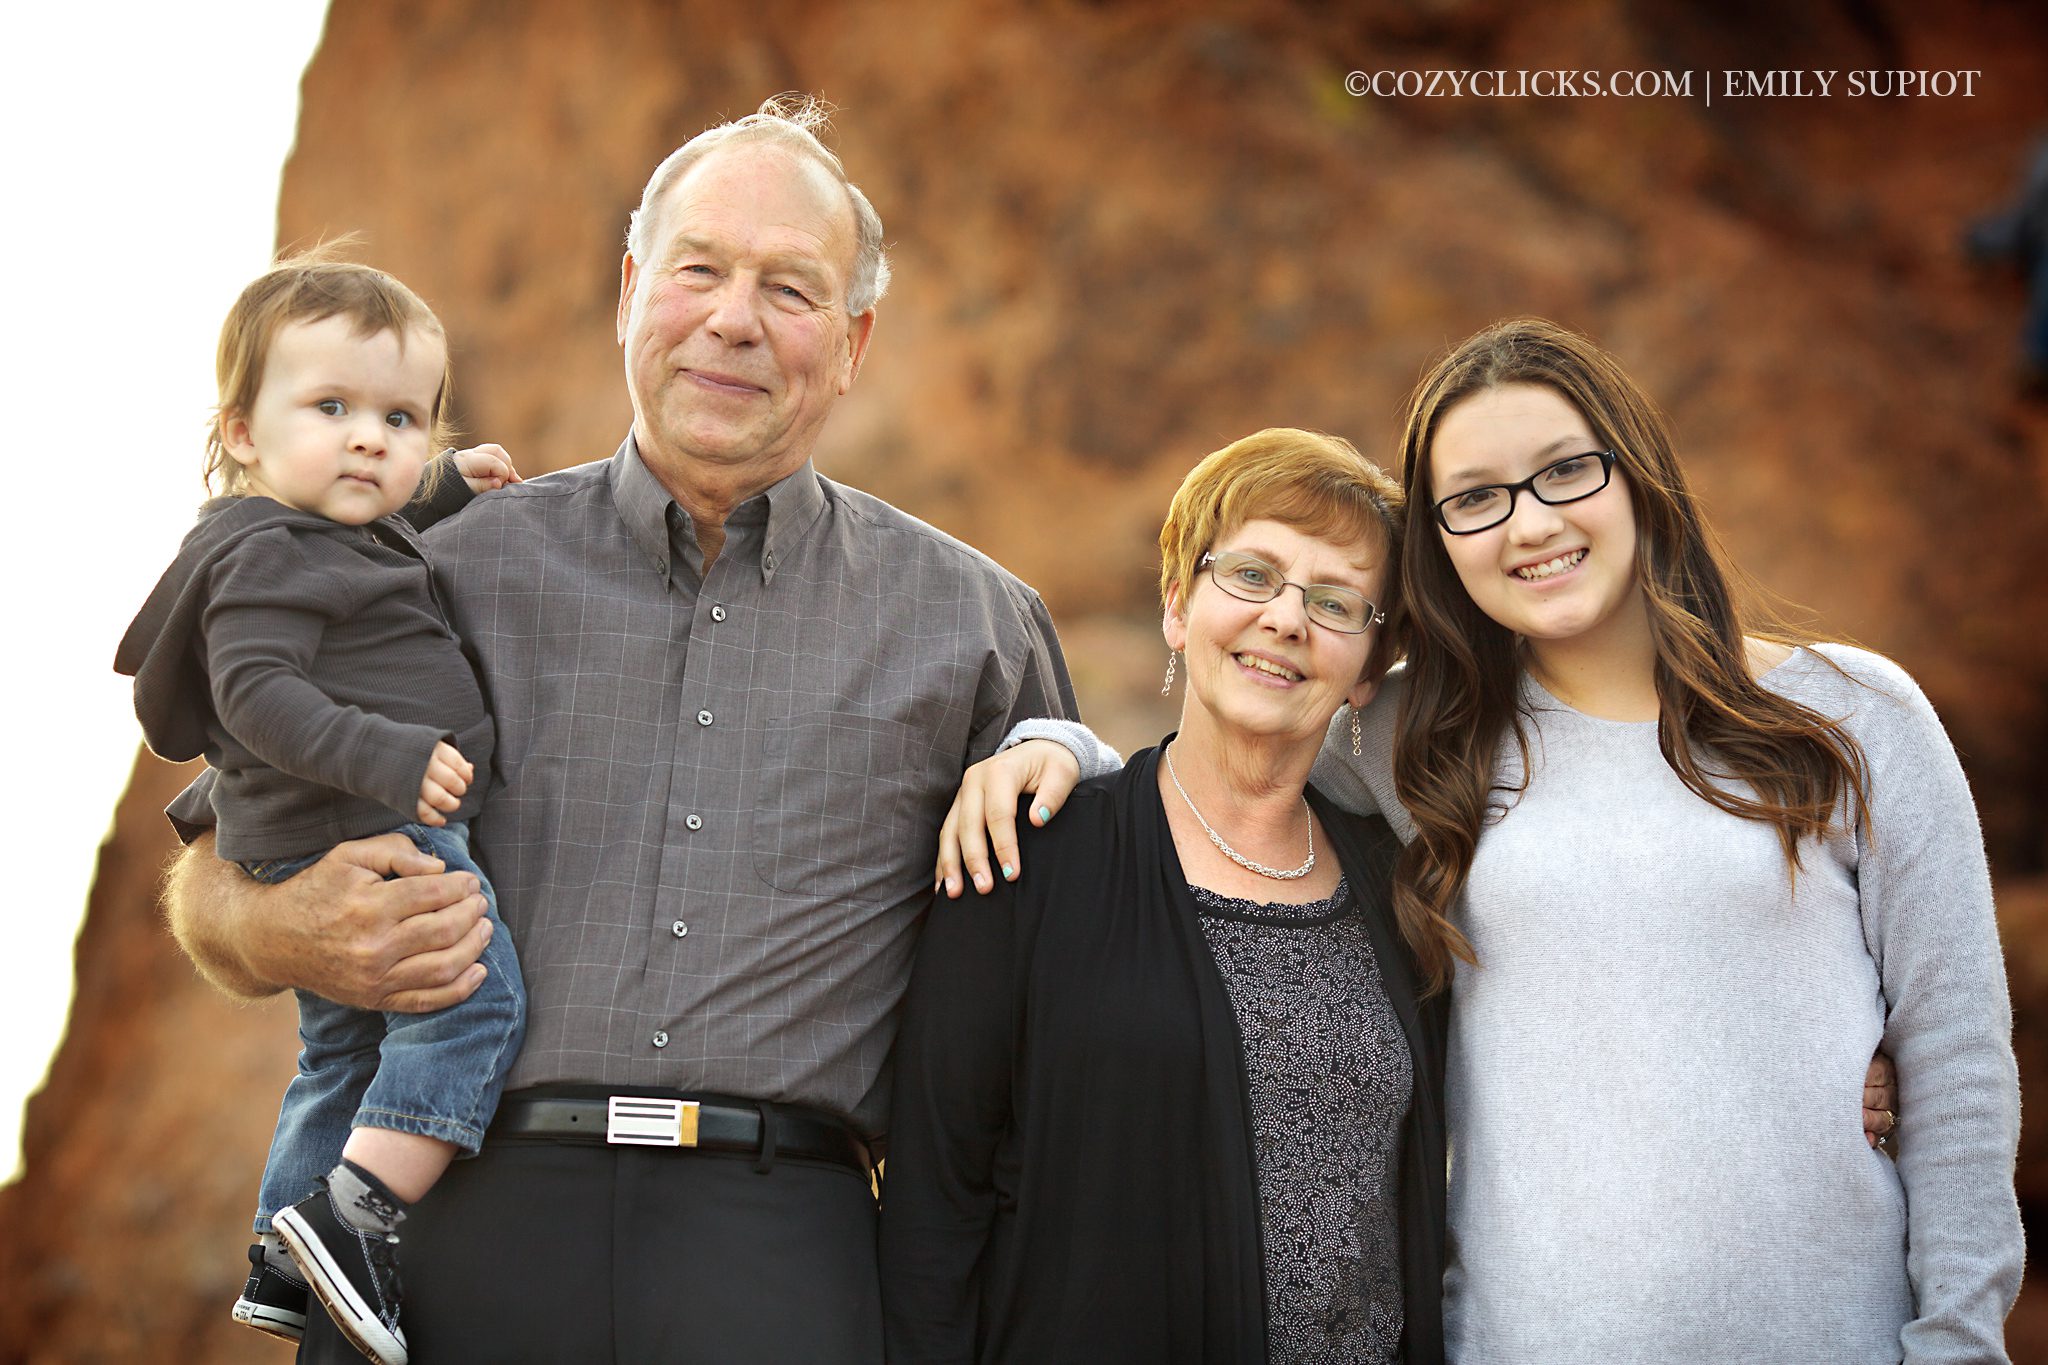 Photograph of grandparents and grand kids smiling together